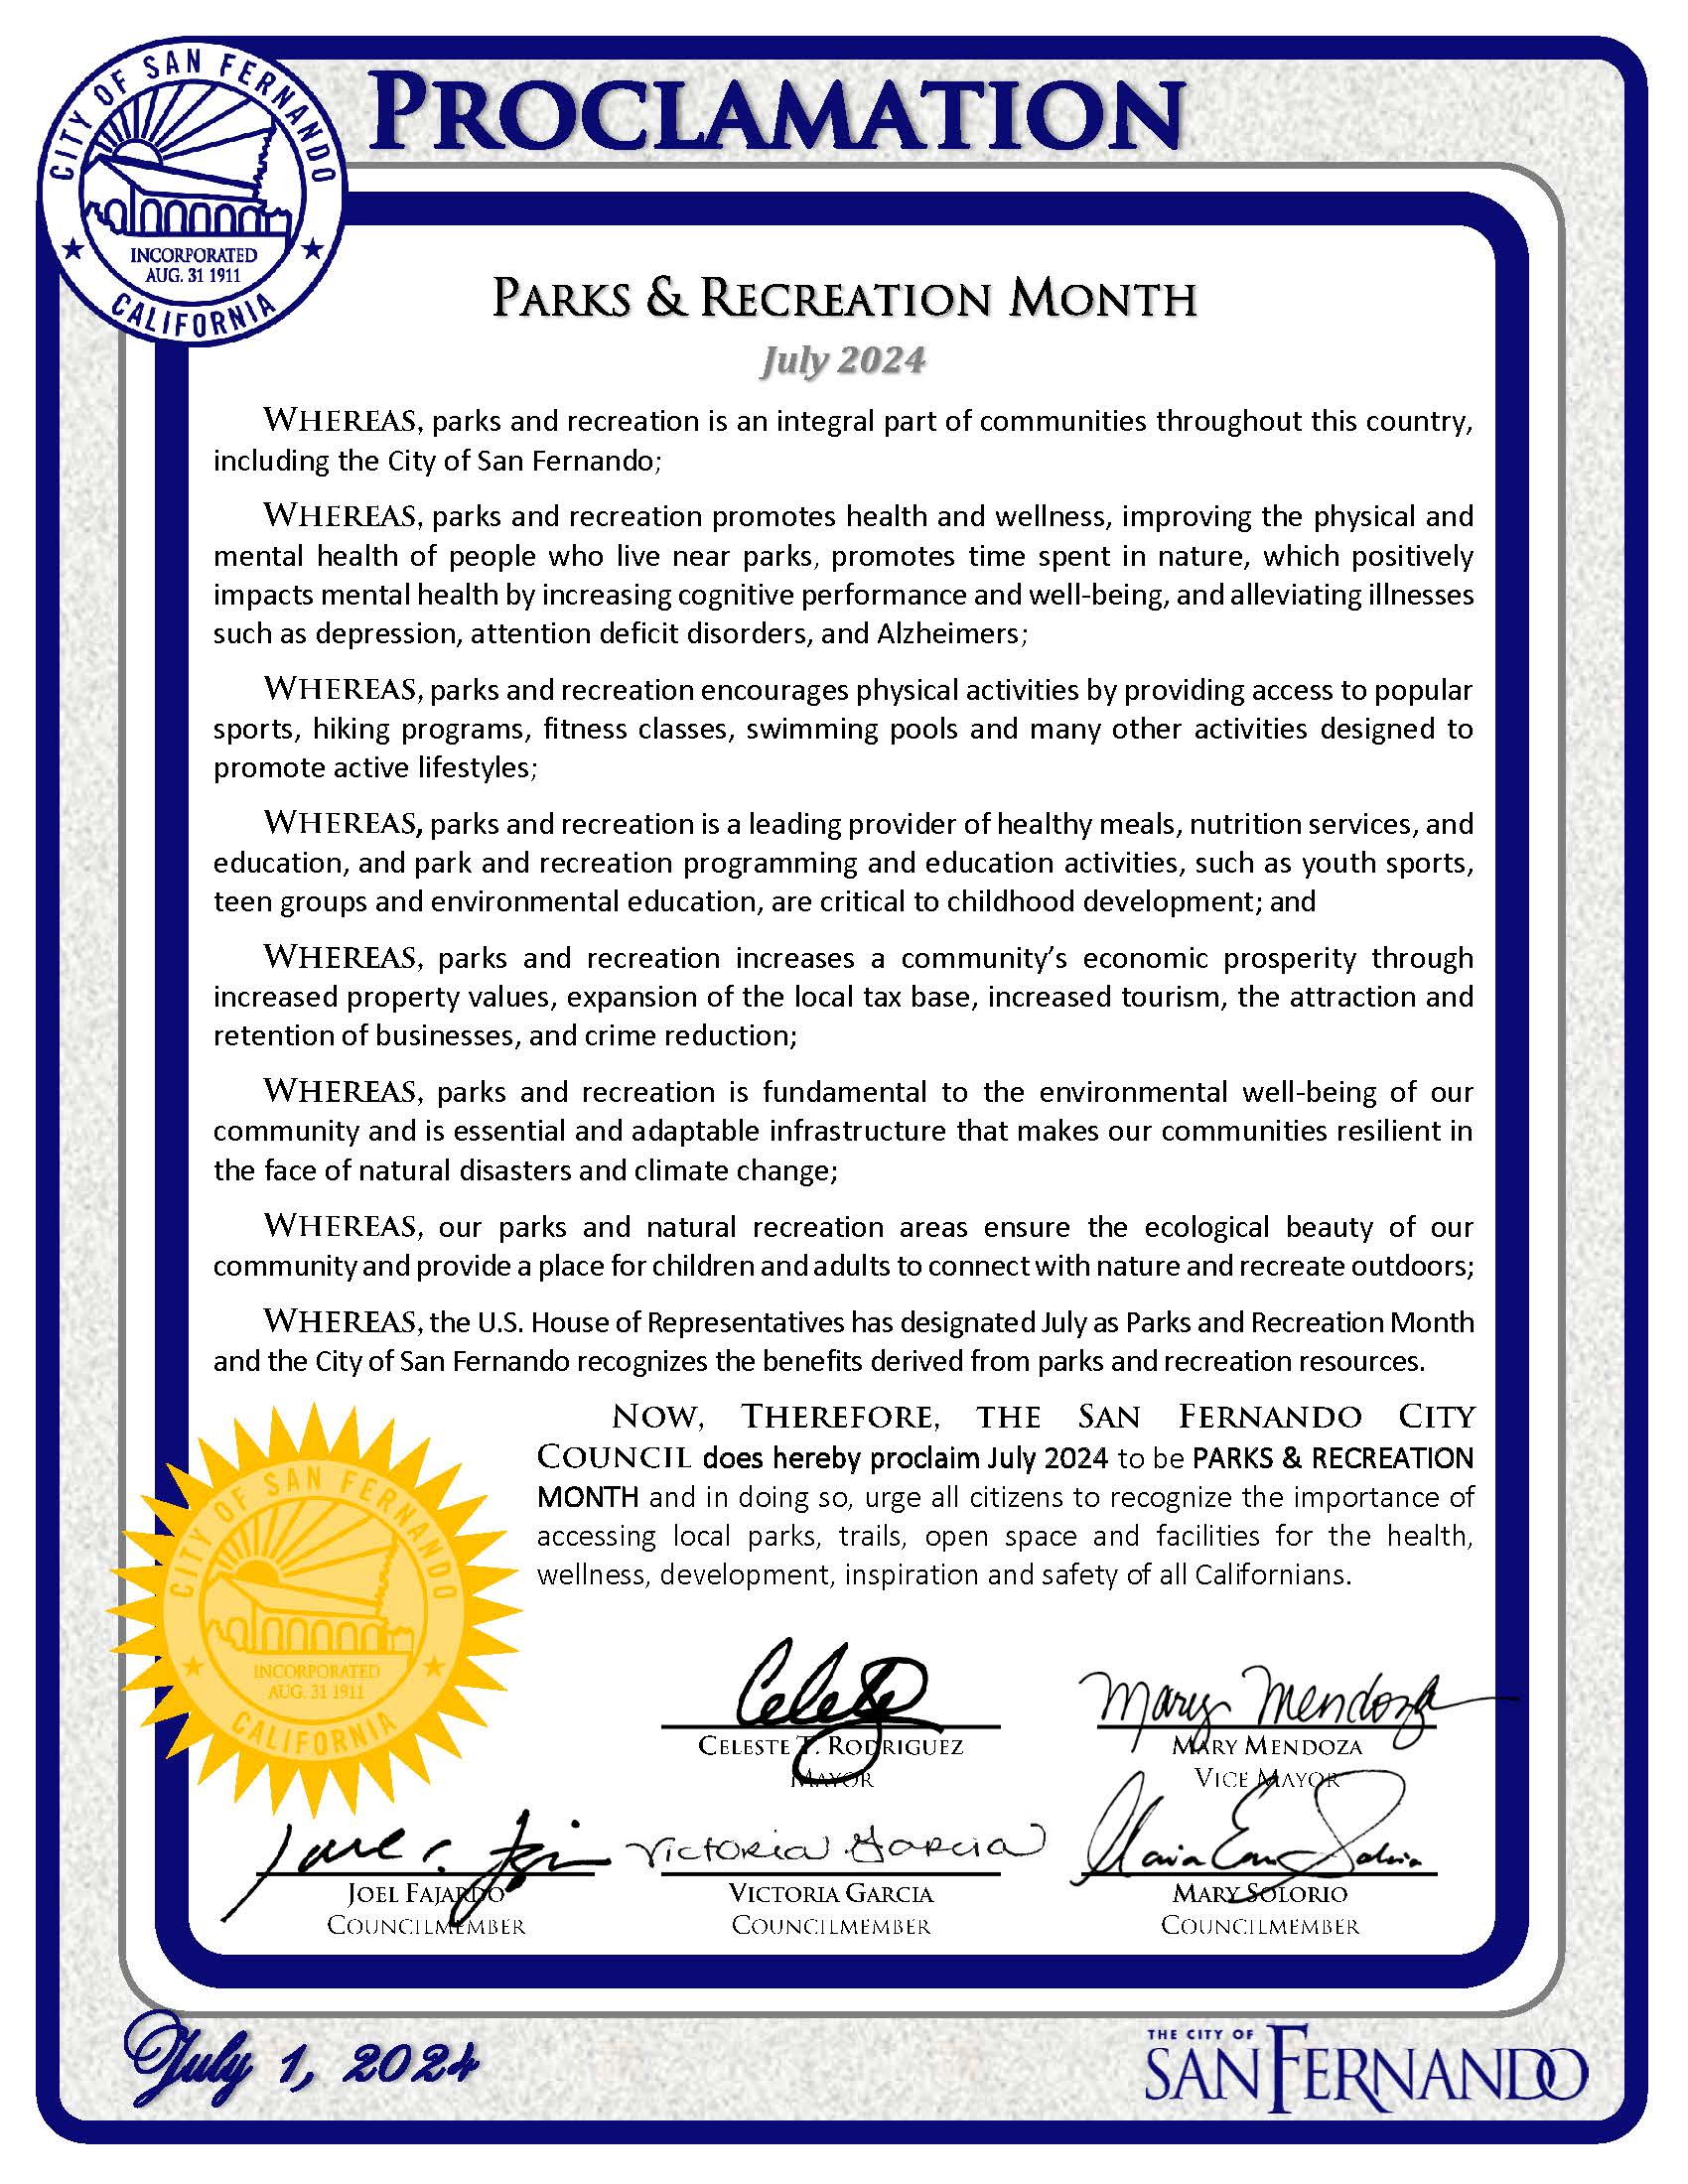 Proclamation for Parks & Recreation Month, July 2024, by the City of San Fernando. The document highlights the importance of parks and recreation in promoting health, wellness, physical activities, economic prosperity, environmental well-being, and community connection. It recognizes July 2024 as Parks & Recreation Month, urging all citizens to utilize local parks and facilities for health, wellness, development, and safety. The proclamation is signed by city council members and the mayor. The City of San Fernando seal and logo are included.